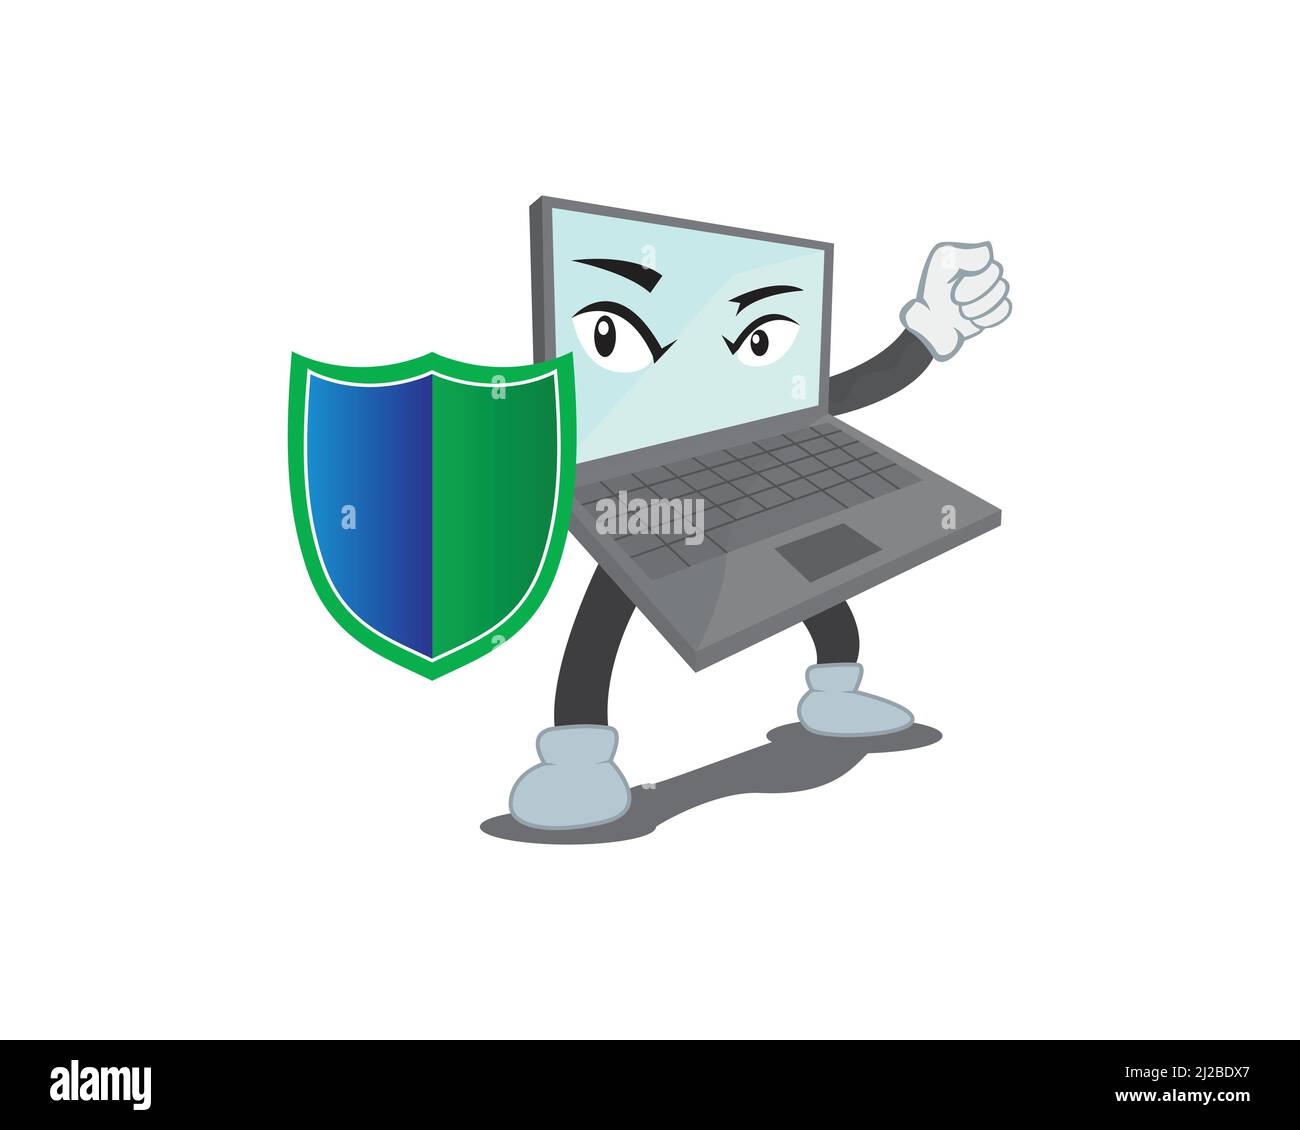 Computer Character Holding Shield as Symbolization of Protection and Security Stock Vector